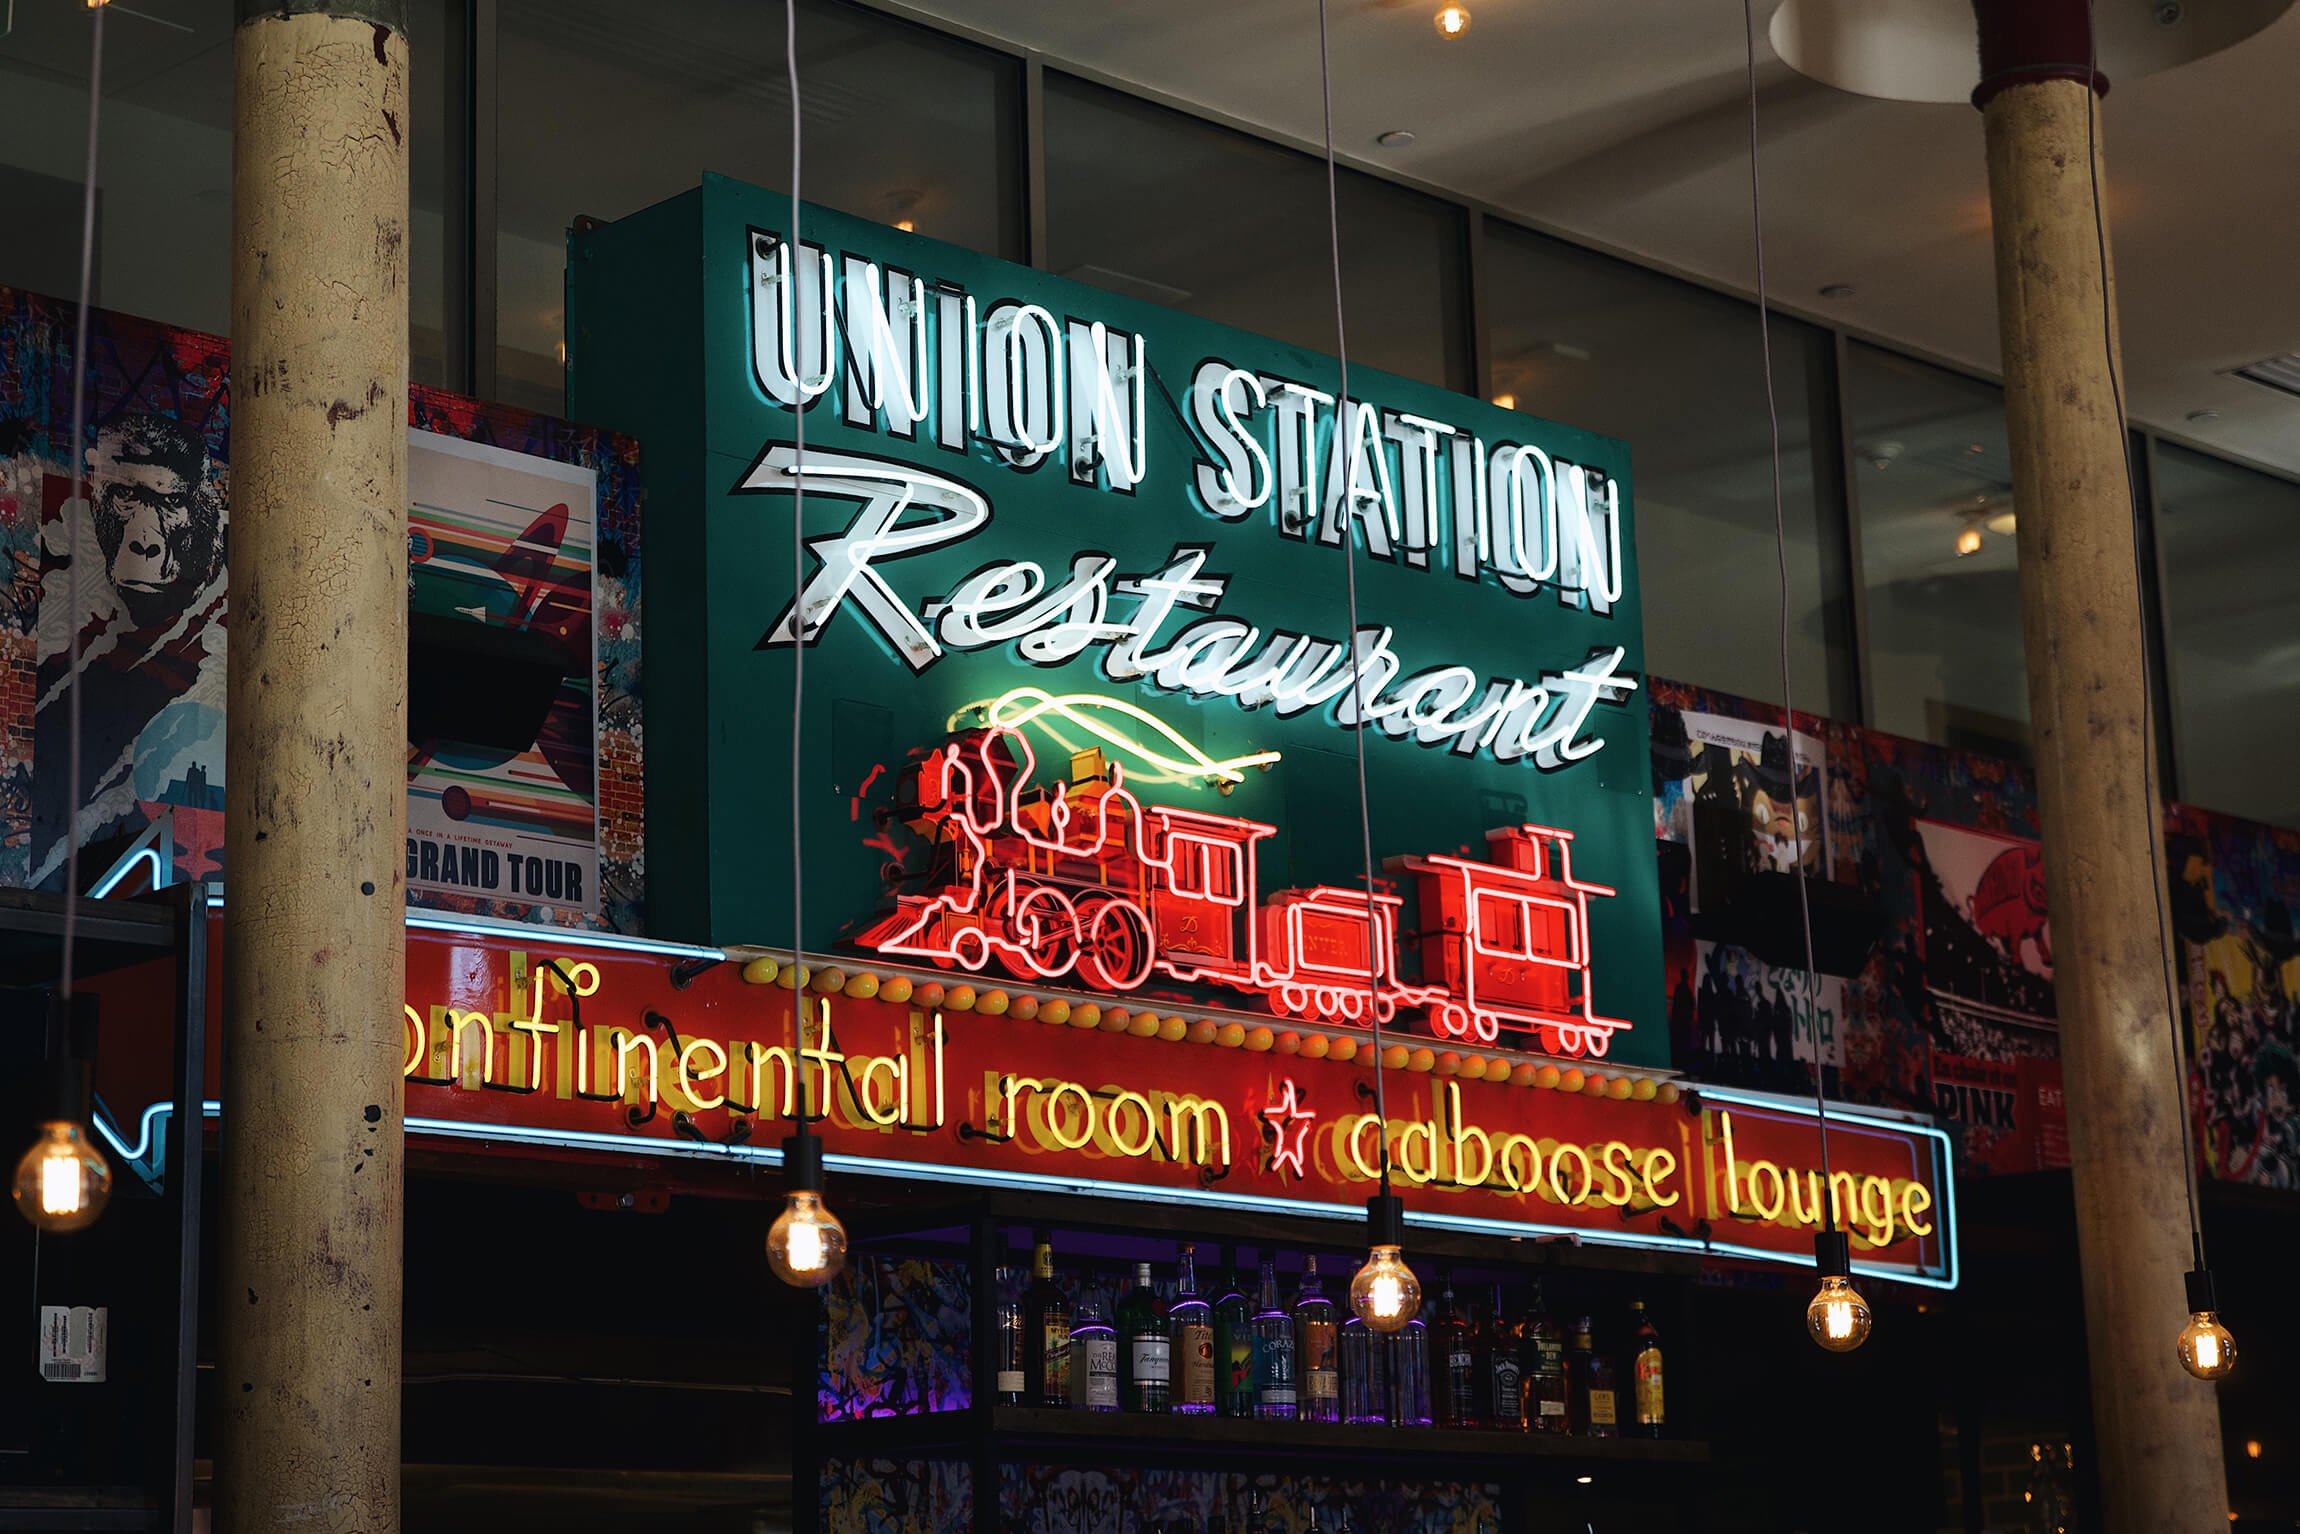 The neon signs of Union Station Restaurant.